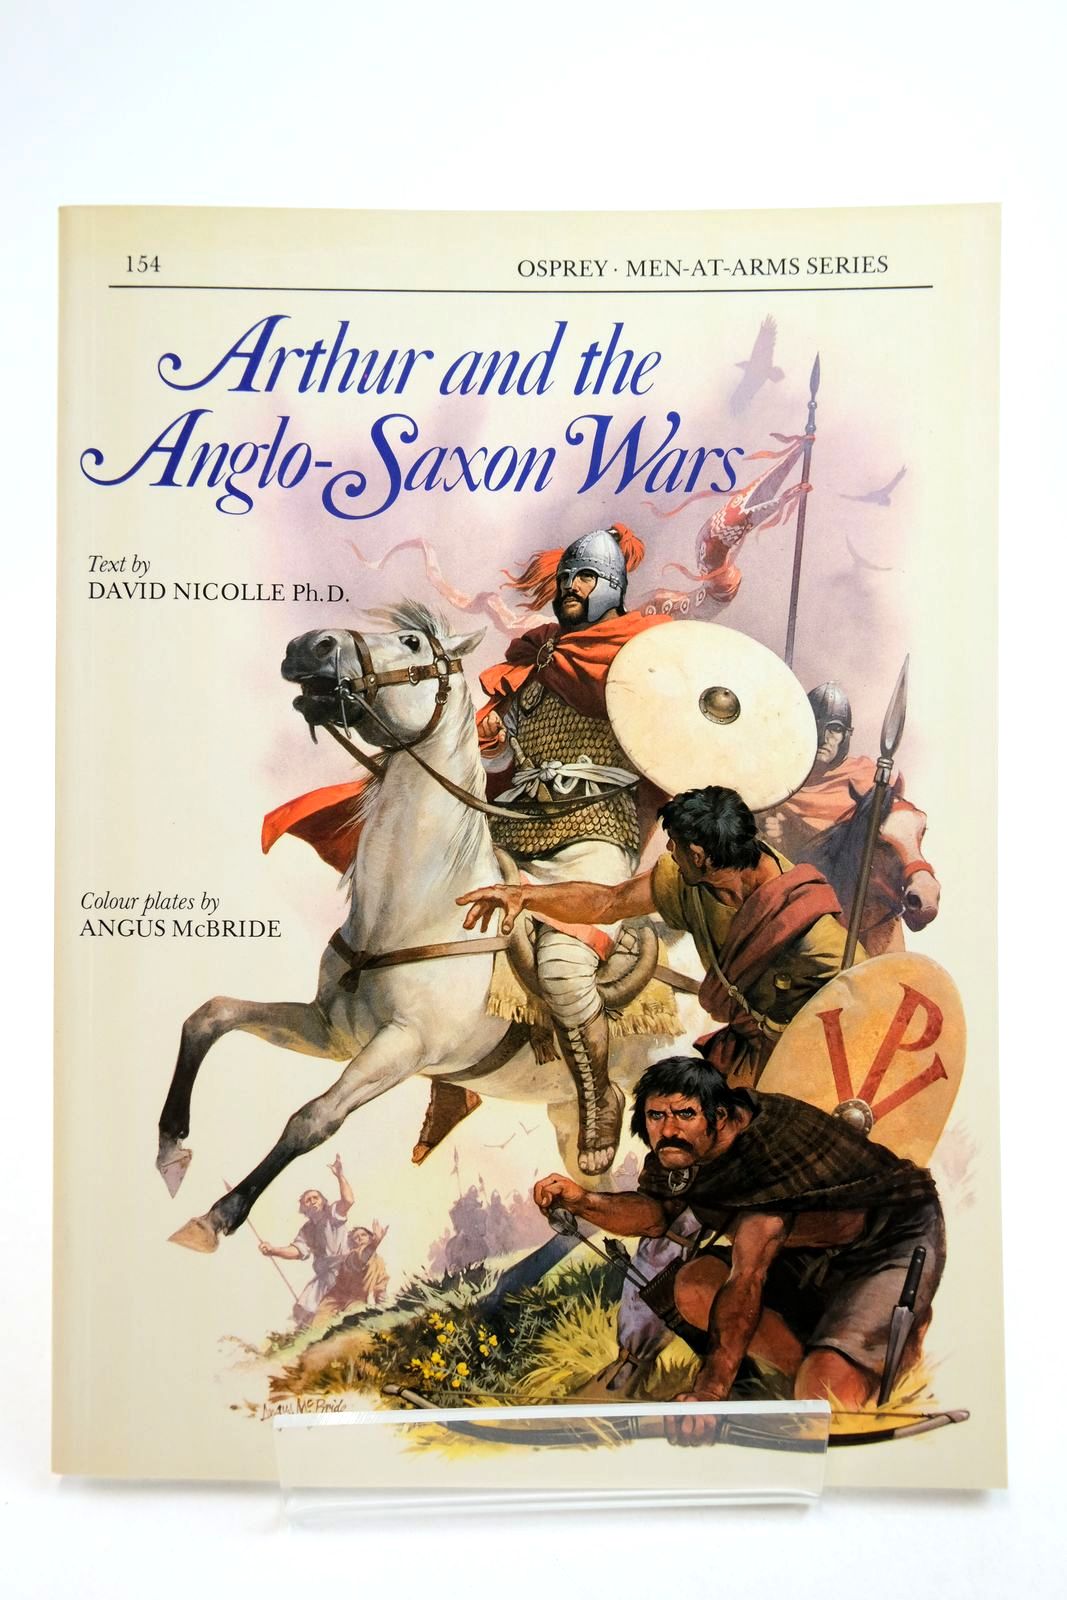 Photo of ARTHUR AND THE ANGLO-SAXON WARS written by Nicolle, David illustrated by McBride, Angus published by Osprey Publishing (STOCK CODE: 2134746)  for sale by Stella & Rose's Books